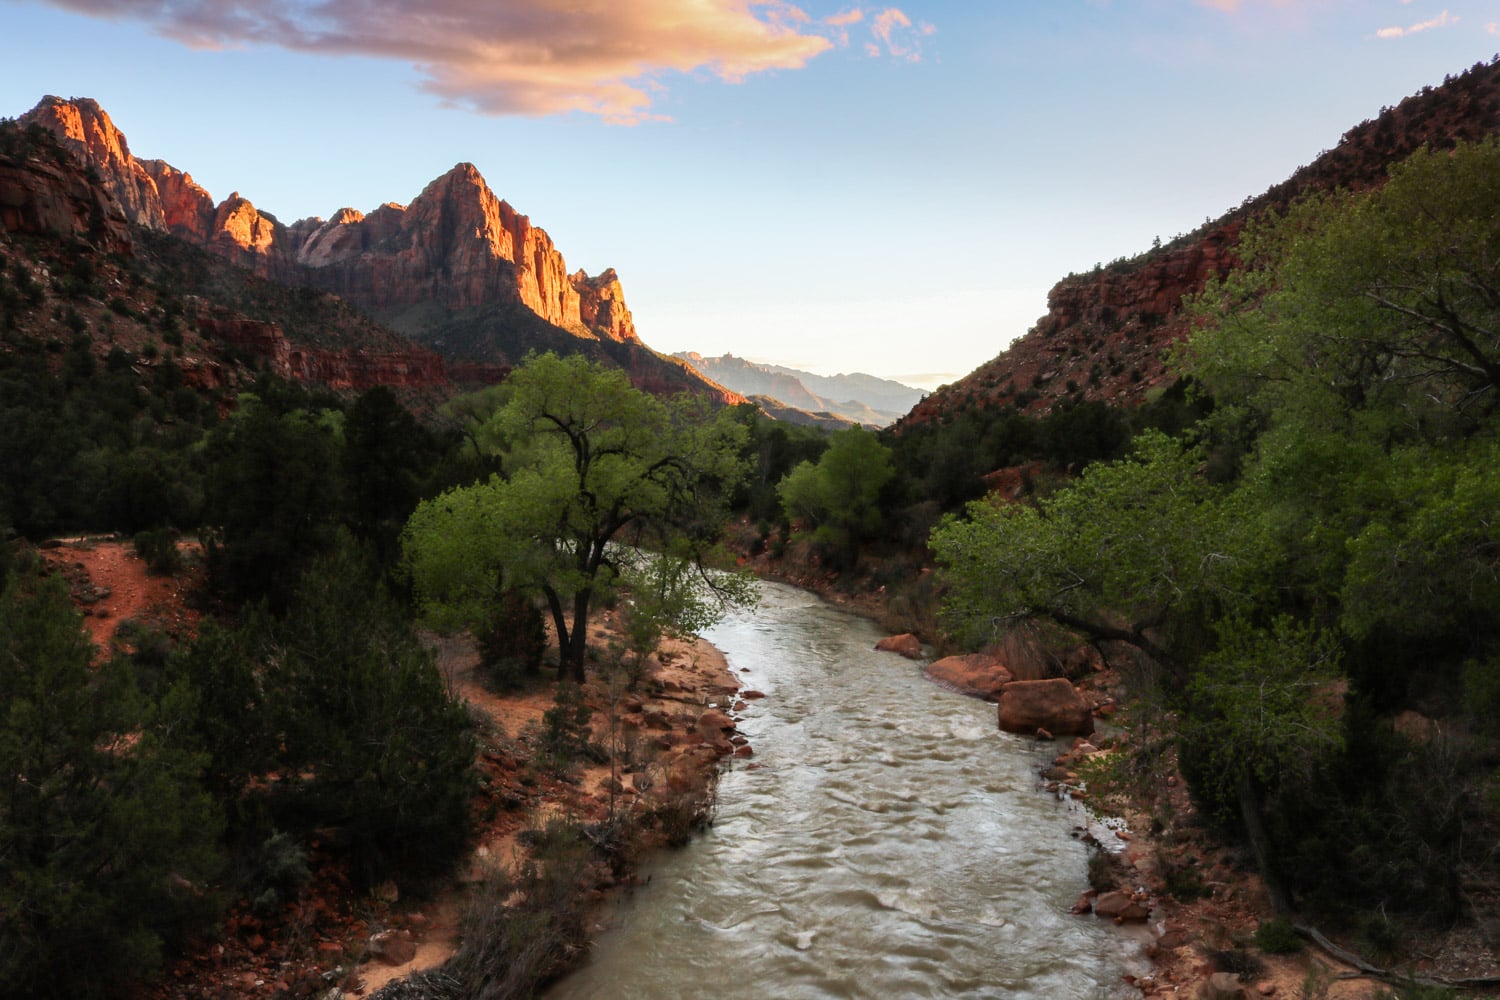 Virgin River and the Watchman, Zion National Park